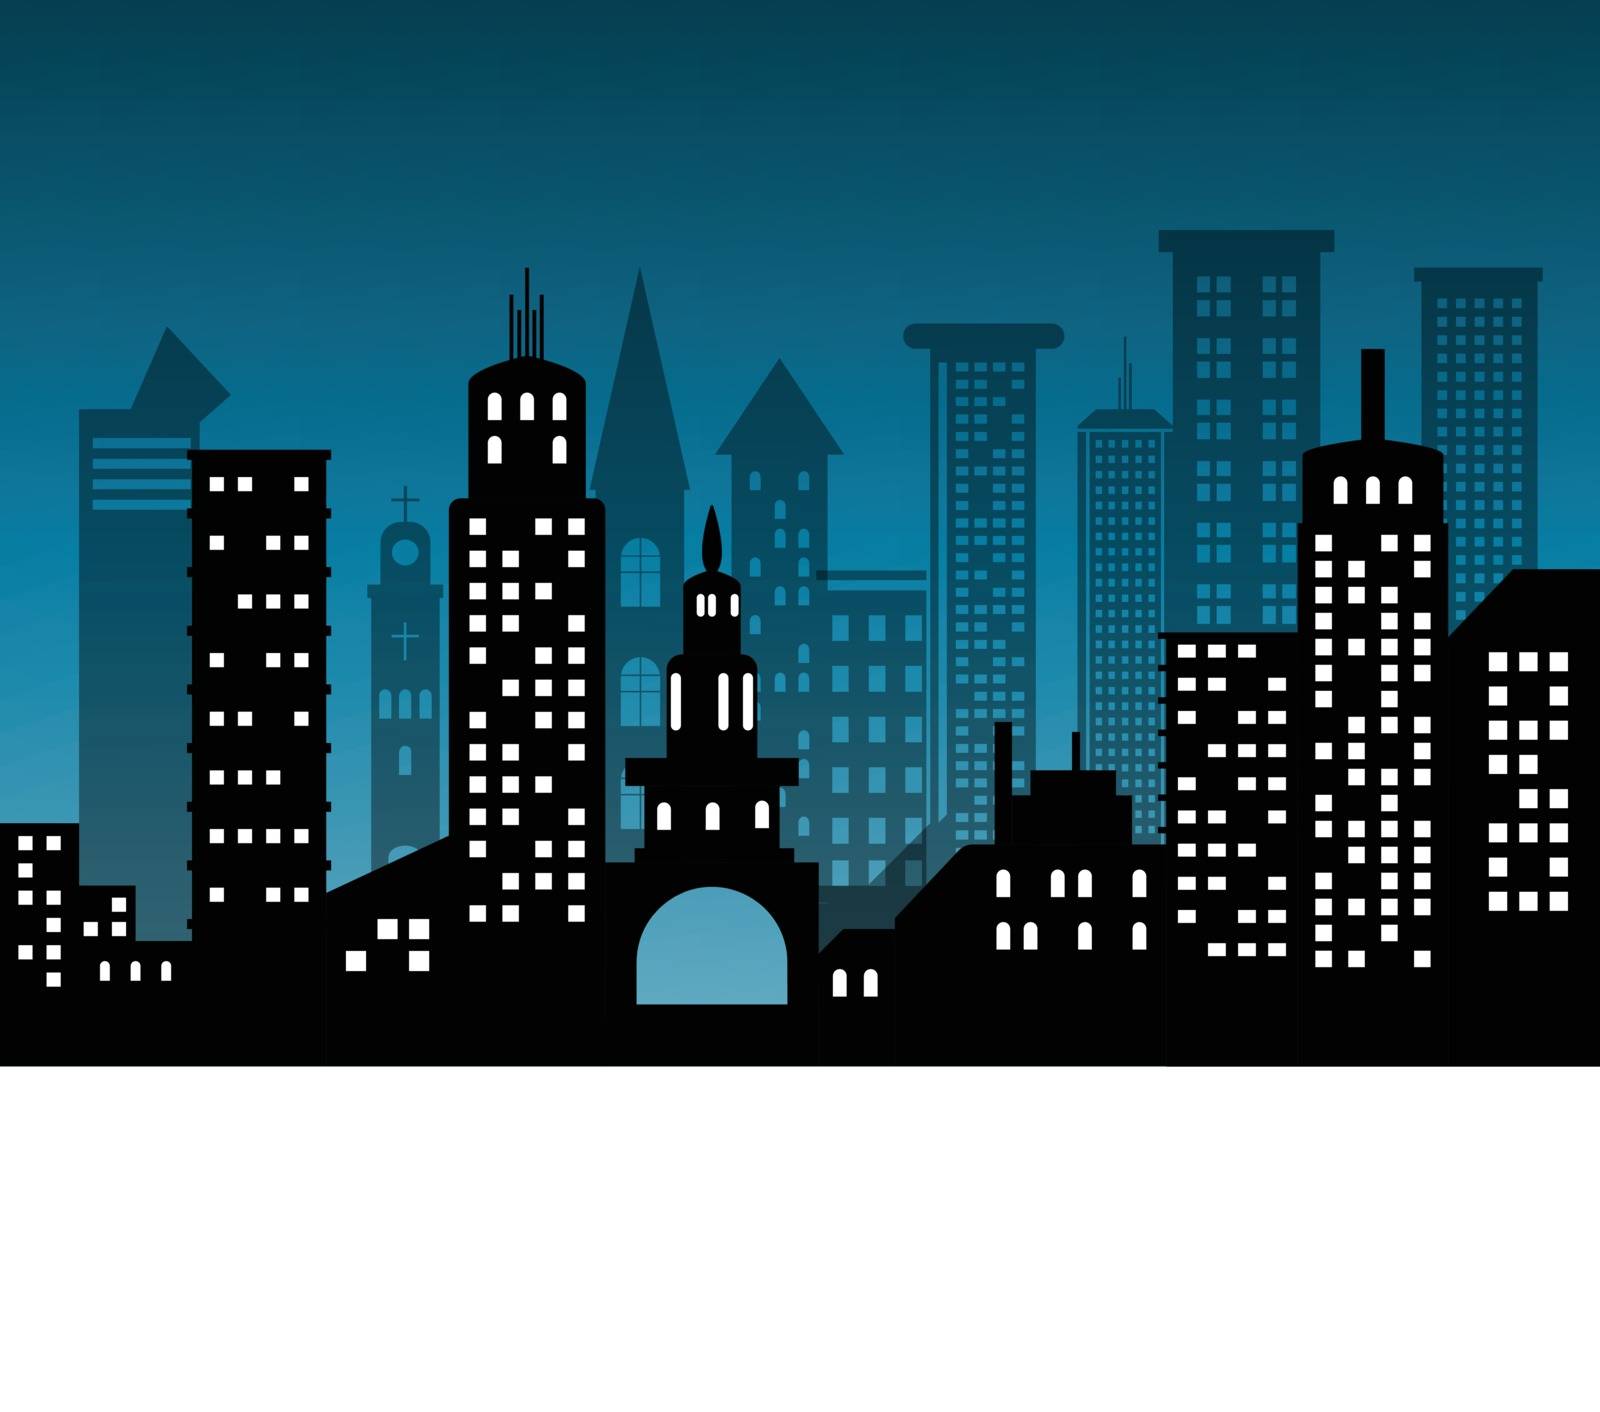 silhouette cityscape architectural building skyscrapers icon. black design flat style on  blue deep background with copy space Illustration vector